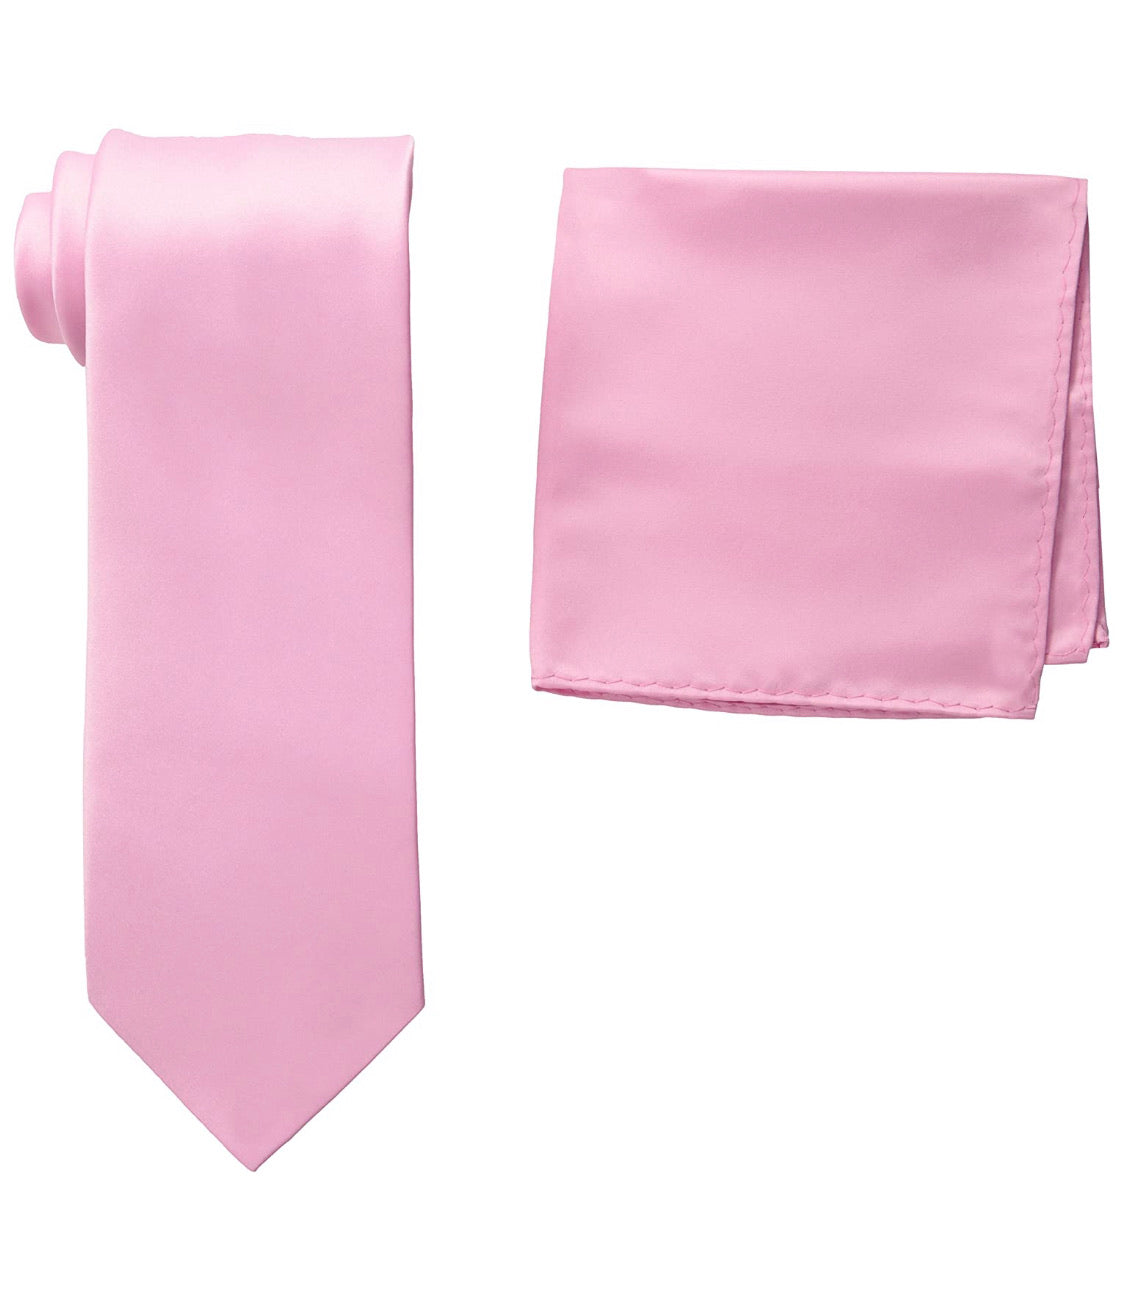 Stacy Adams Solid Pink Tie and Hanky - On Time Fashions Tuscaloosa